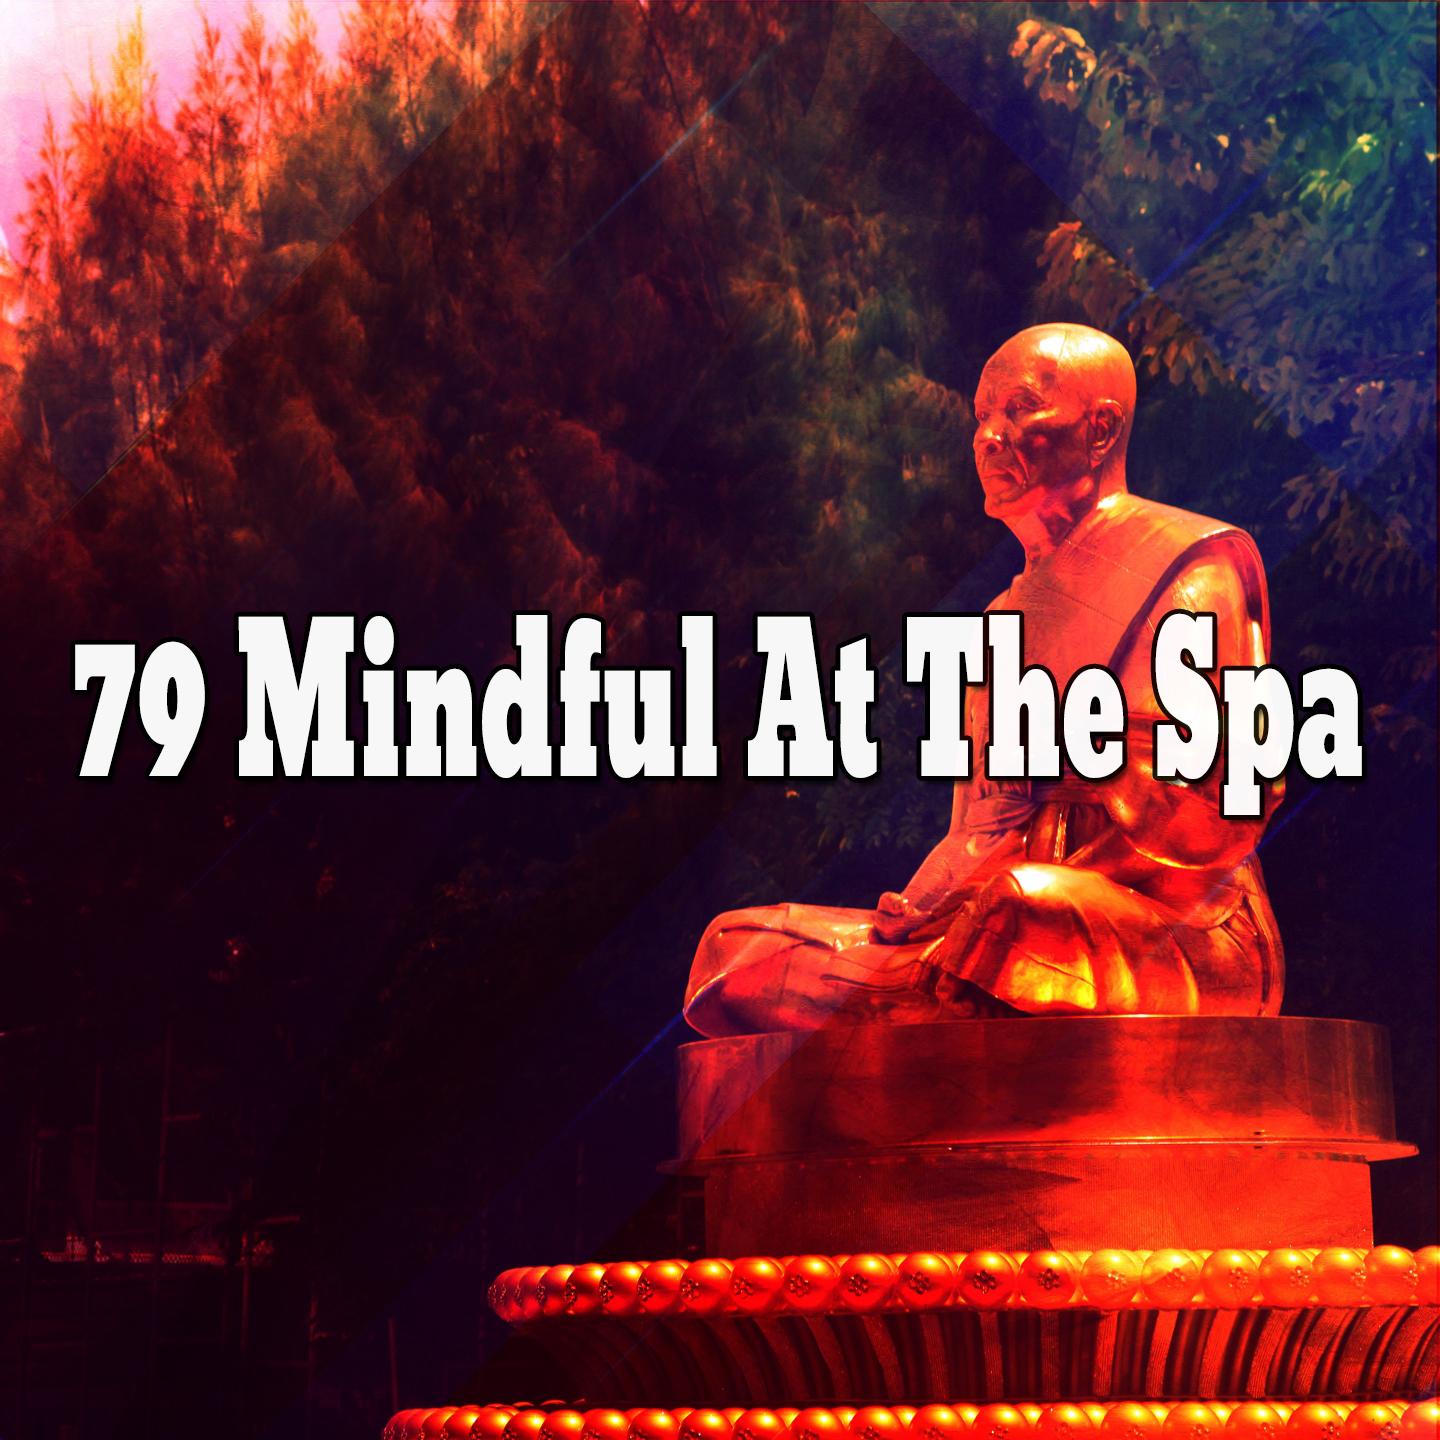 79 Mindful At The Spa